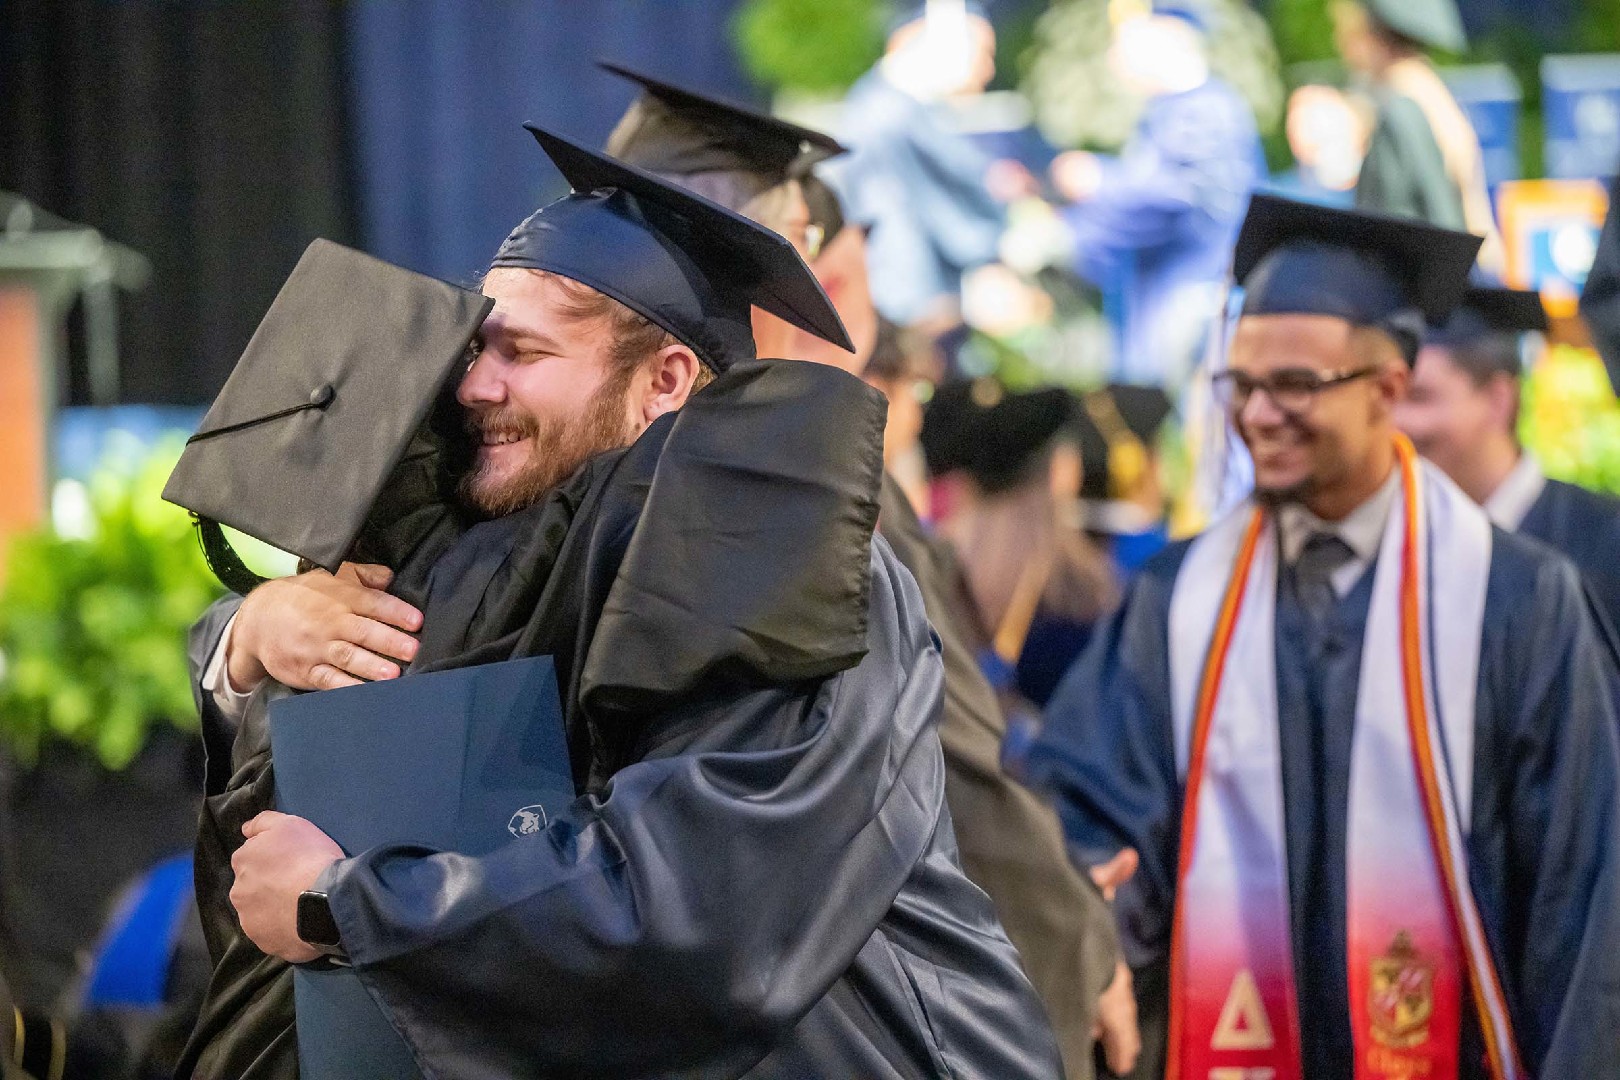 penn-state-behrend-s-spring-2023-commencement-ceremony-image-gallery-74691-penn-state-behrend